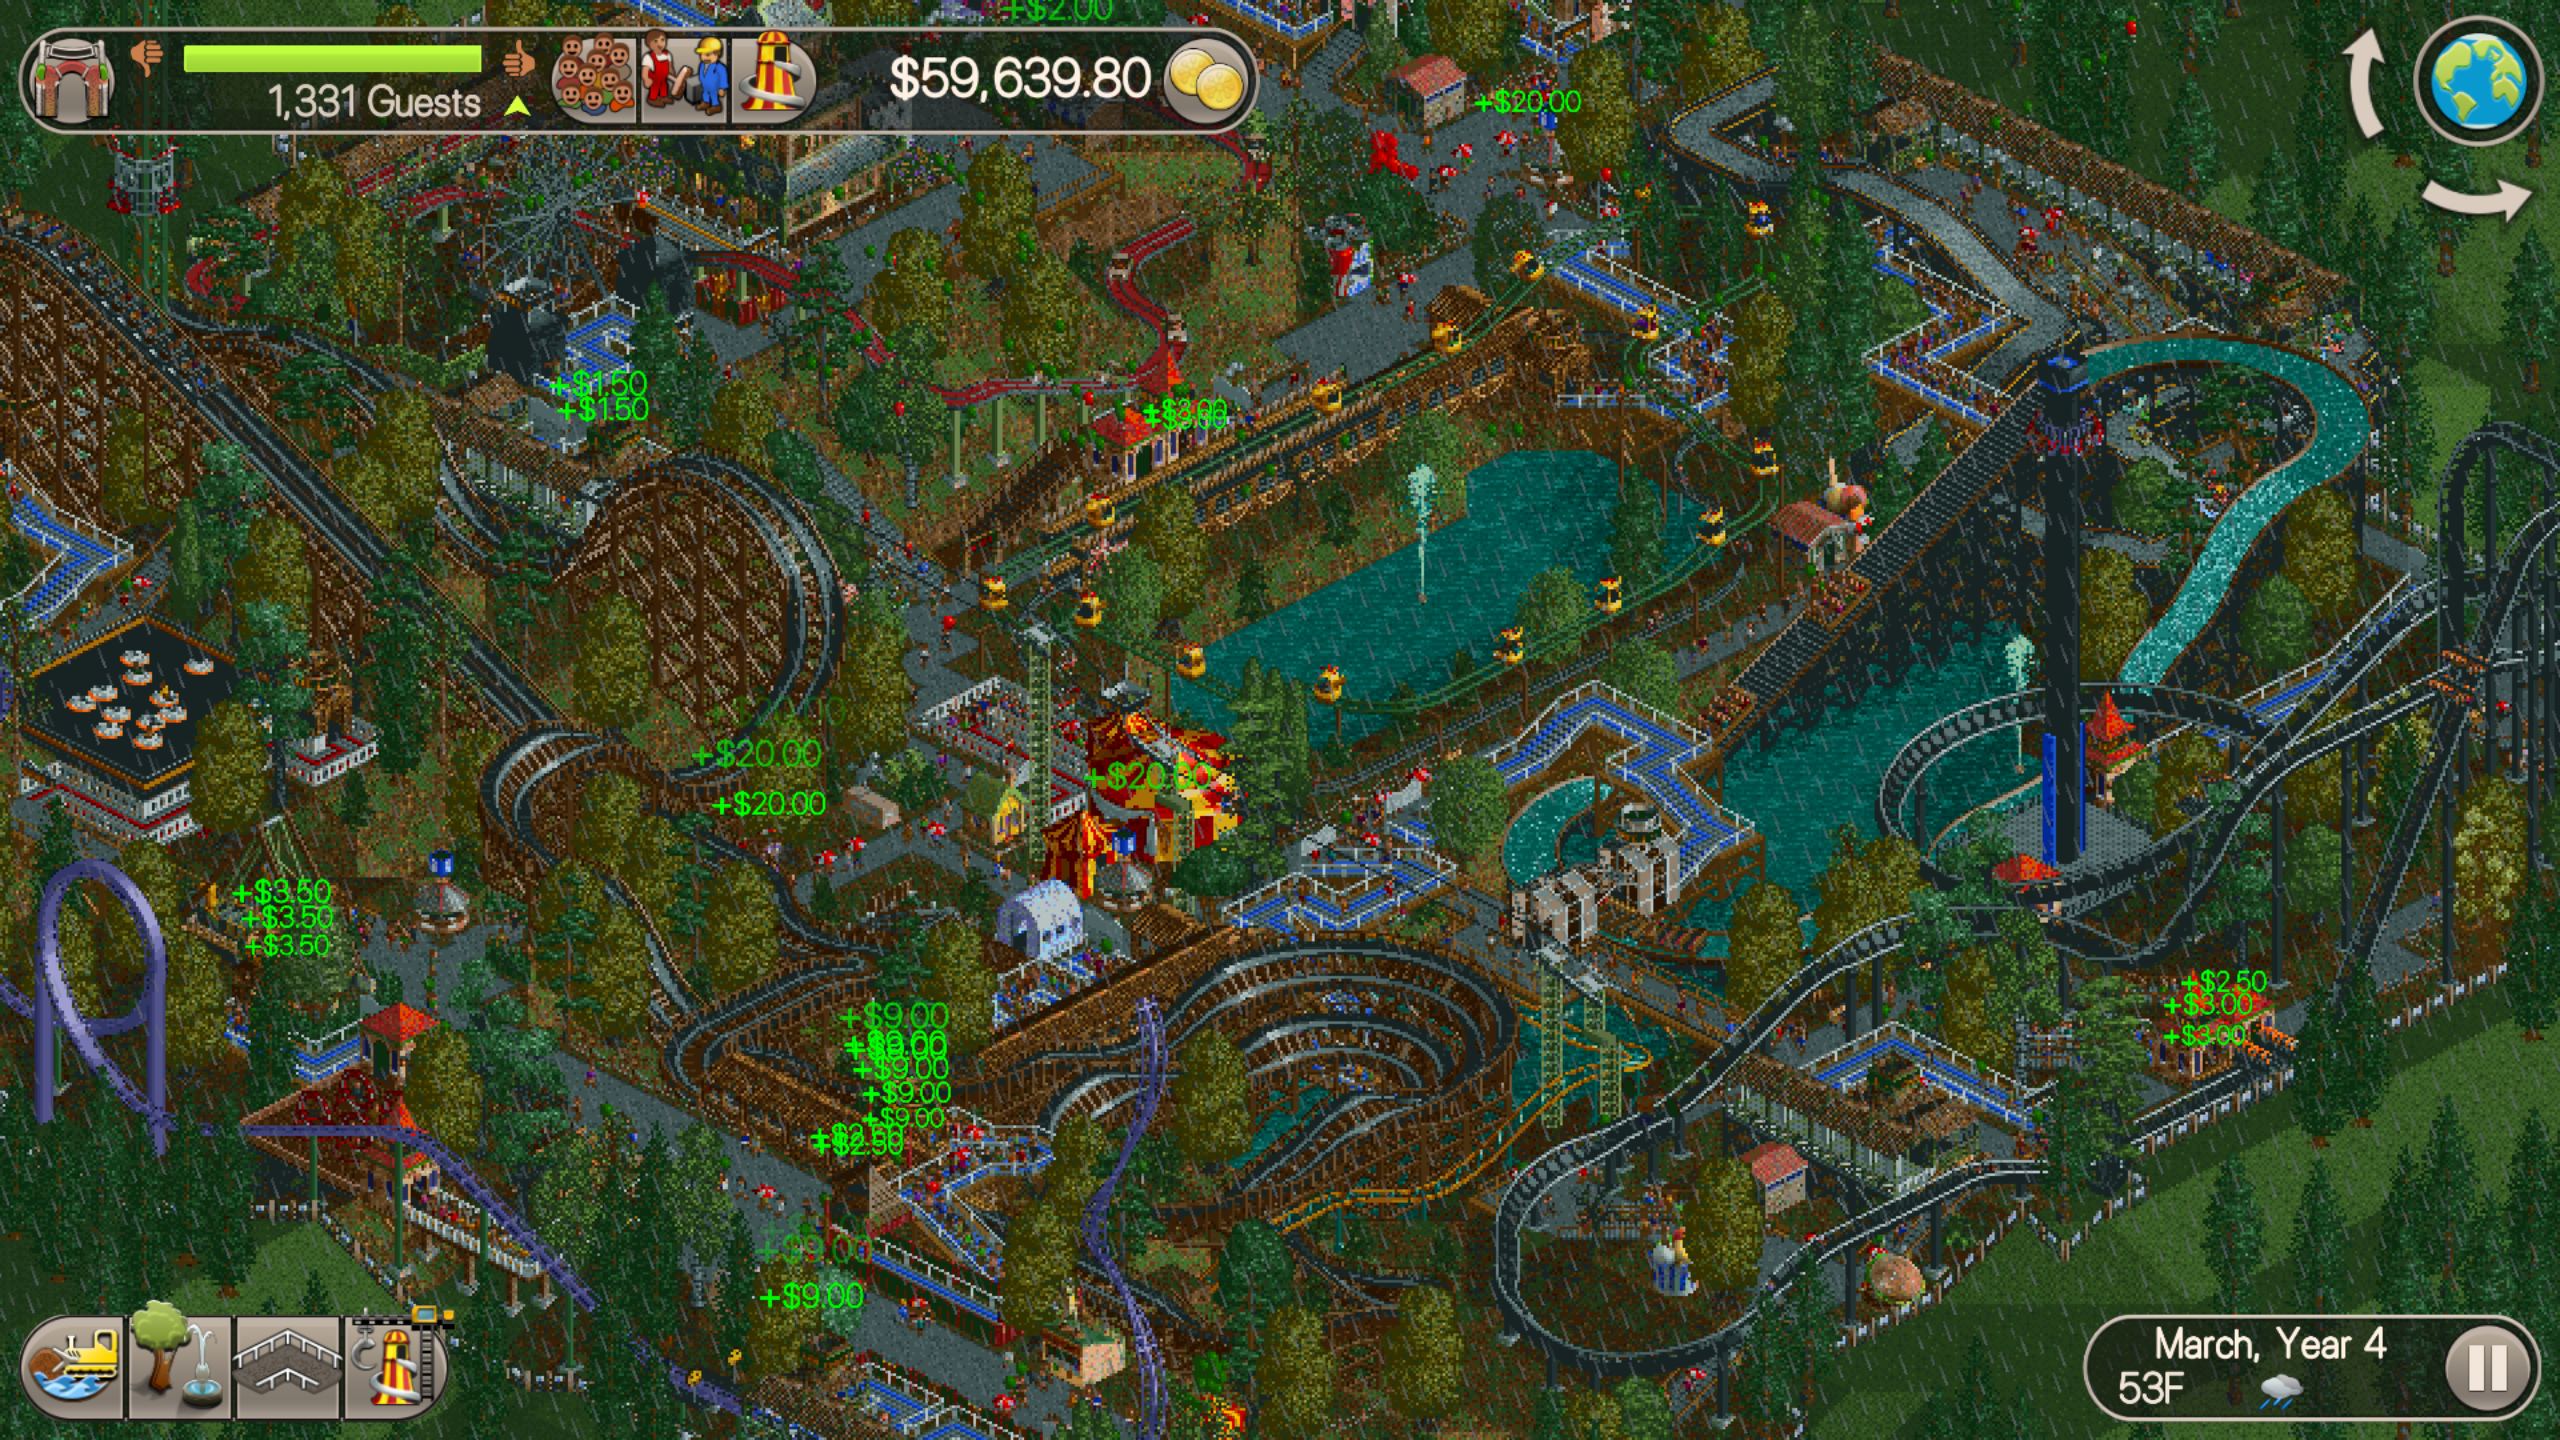 RollerCoaster Tycoon Classic Now Available for Mobile Devices - Totally  Worth the Wait - RCT4 Release Date